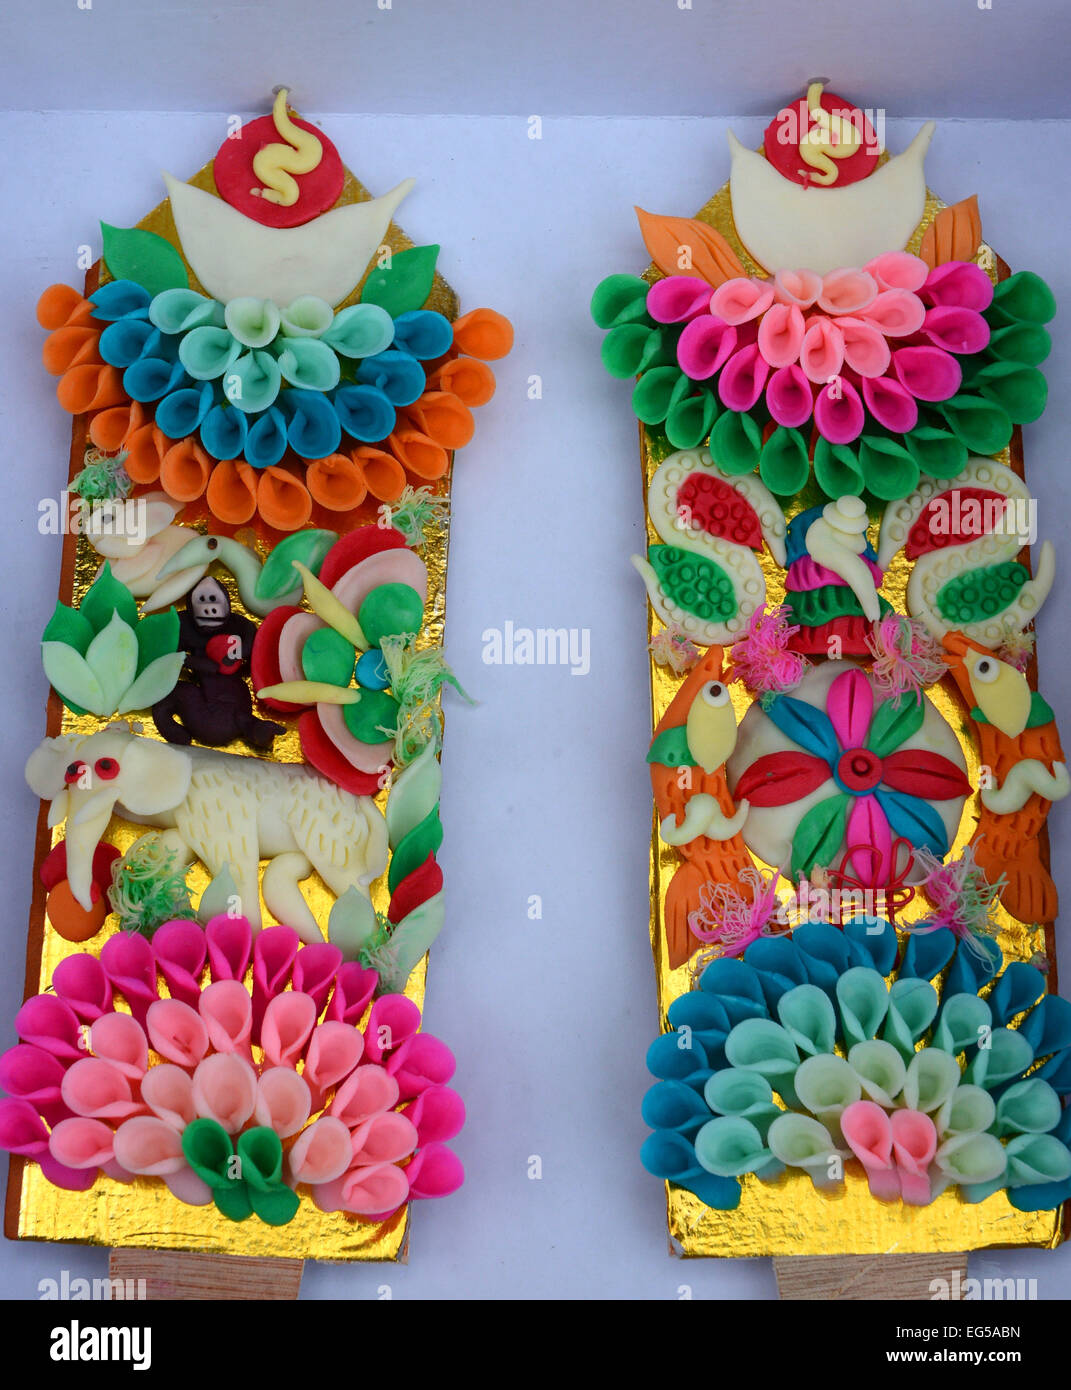 Lhasa. 17th Feb, 2015. Photo taken on Feb. 17, 2015 shows butter sculptures for sale in Lhasa, capital of southwest China's Tibet Autonomous Region. Tibetan people were busy with purchasing goods for the coming Tibetan New Year or Losar, which happens to fall on Feb. 19, the same day with Chinese Lunar New Year. © Chogo/Xinhua/Alamy Live News Stock Photo